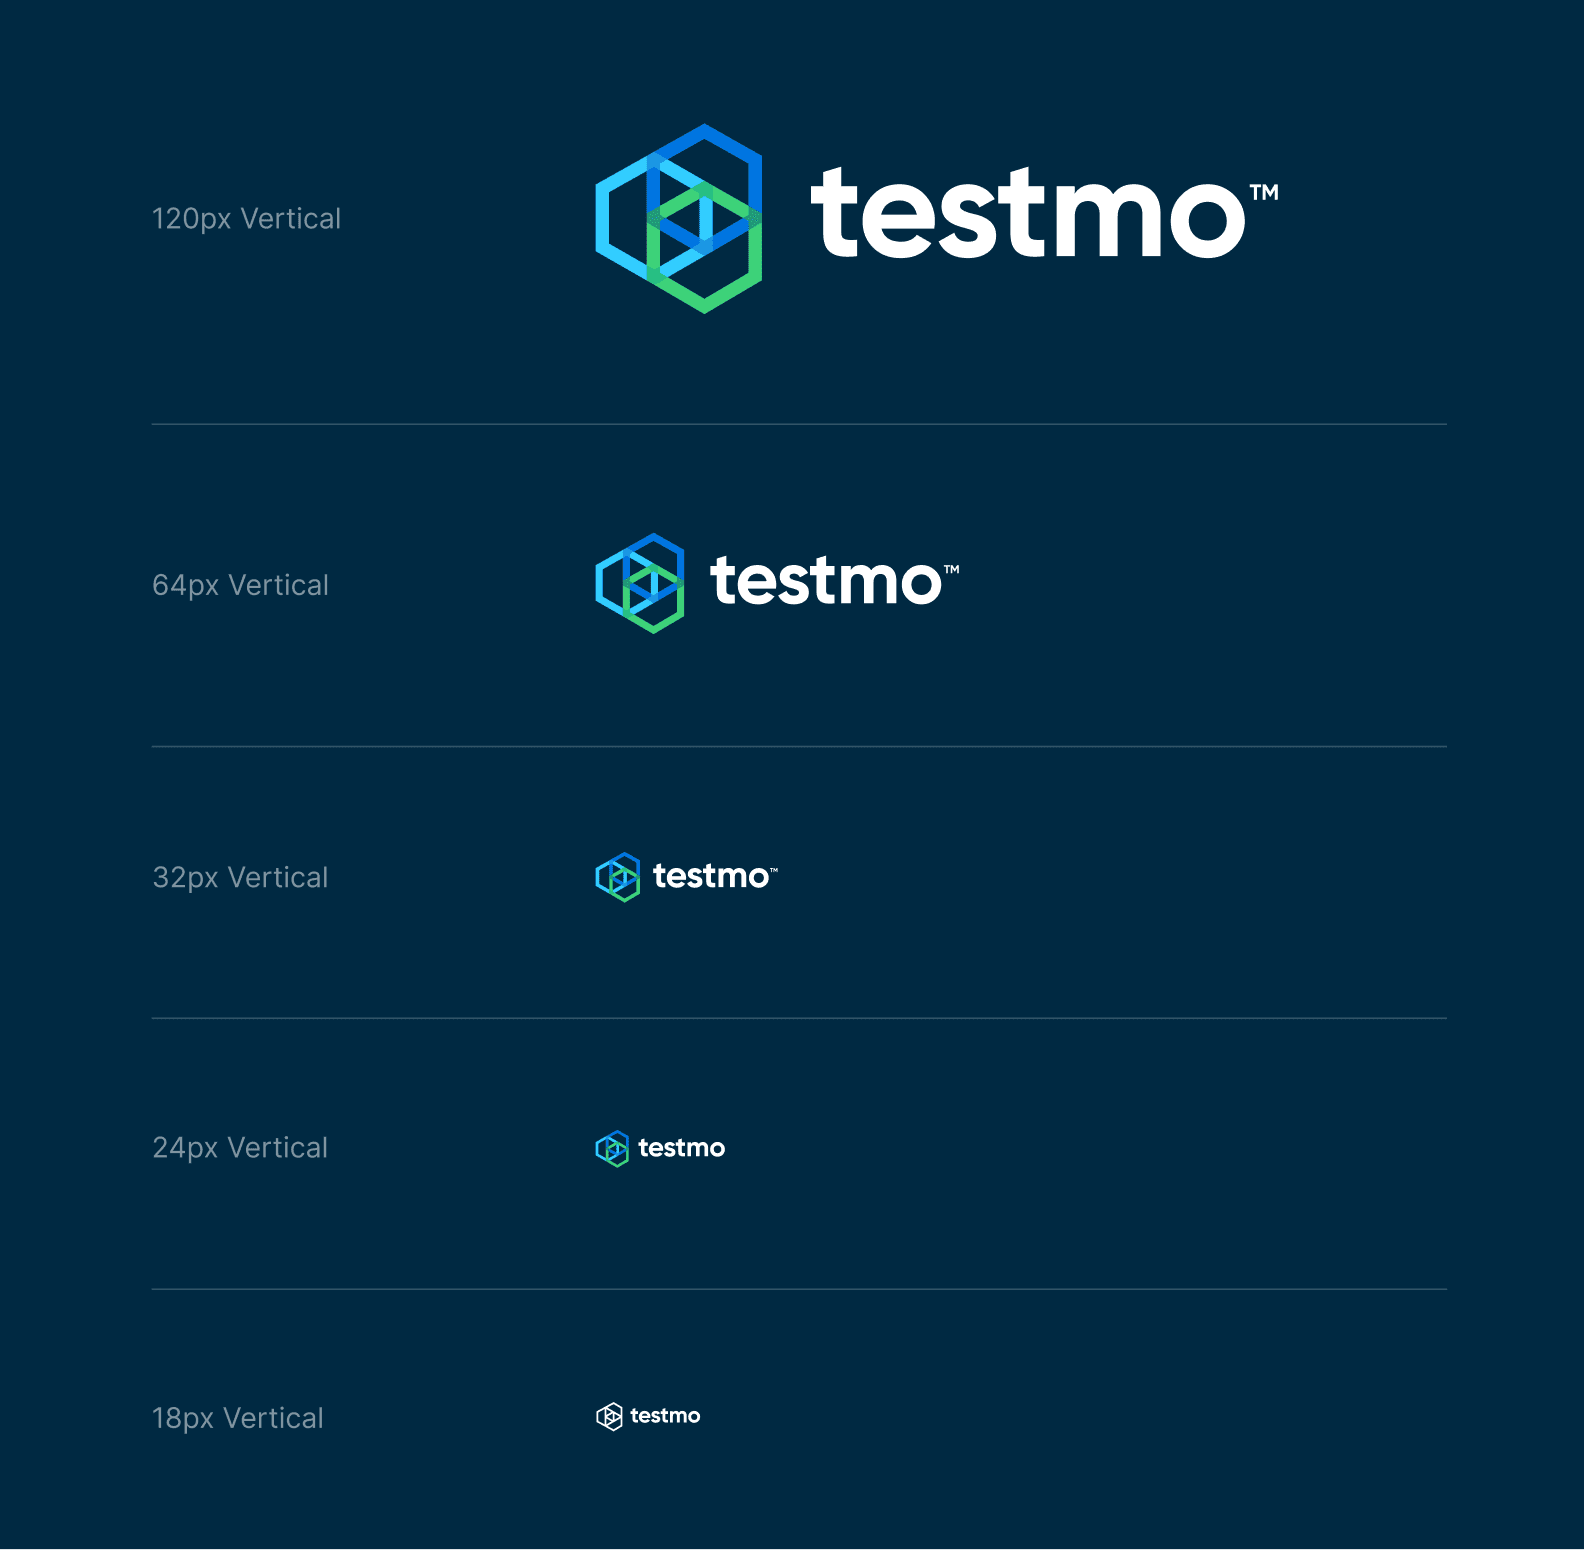  Logo variations and responsive designs from brand Testmo.